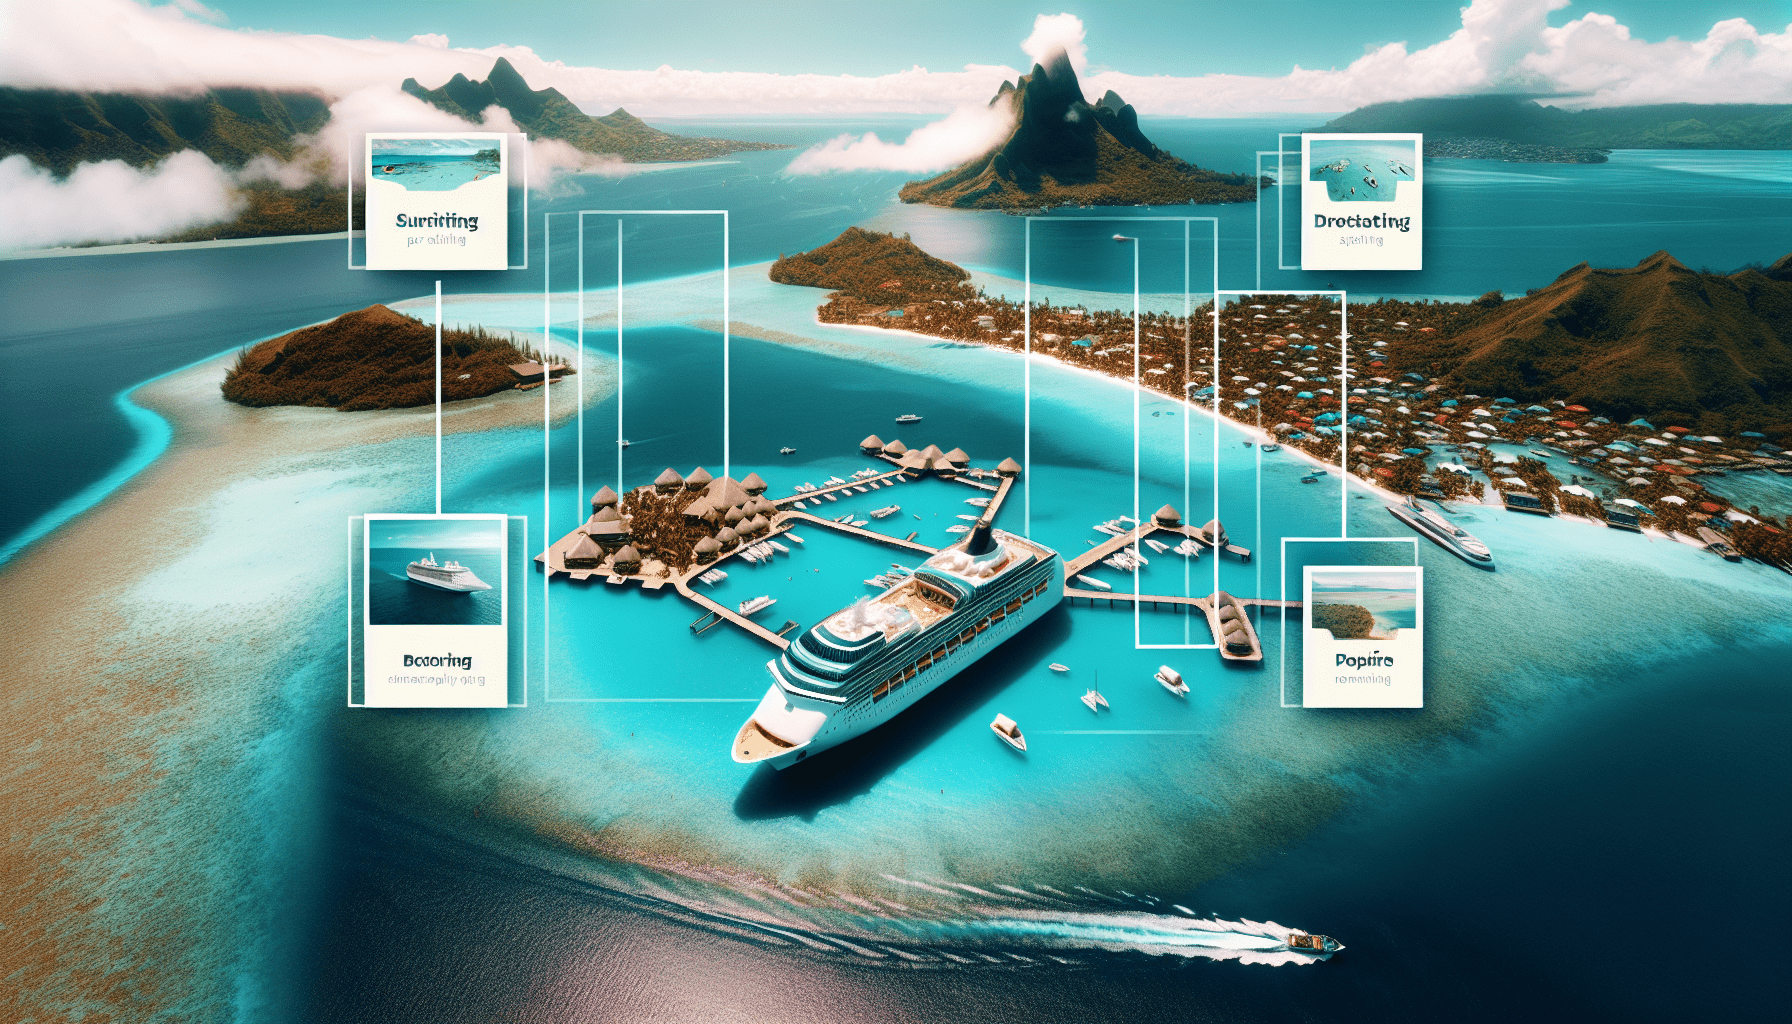 5 Things To Do On Port Day In Bora Bora